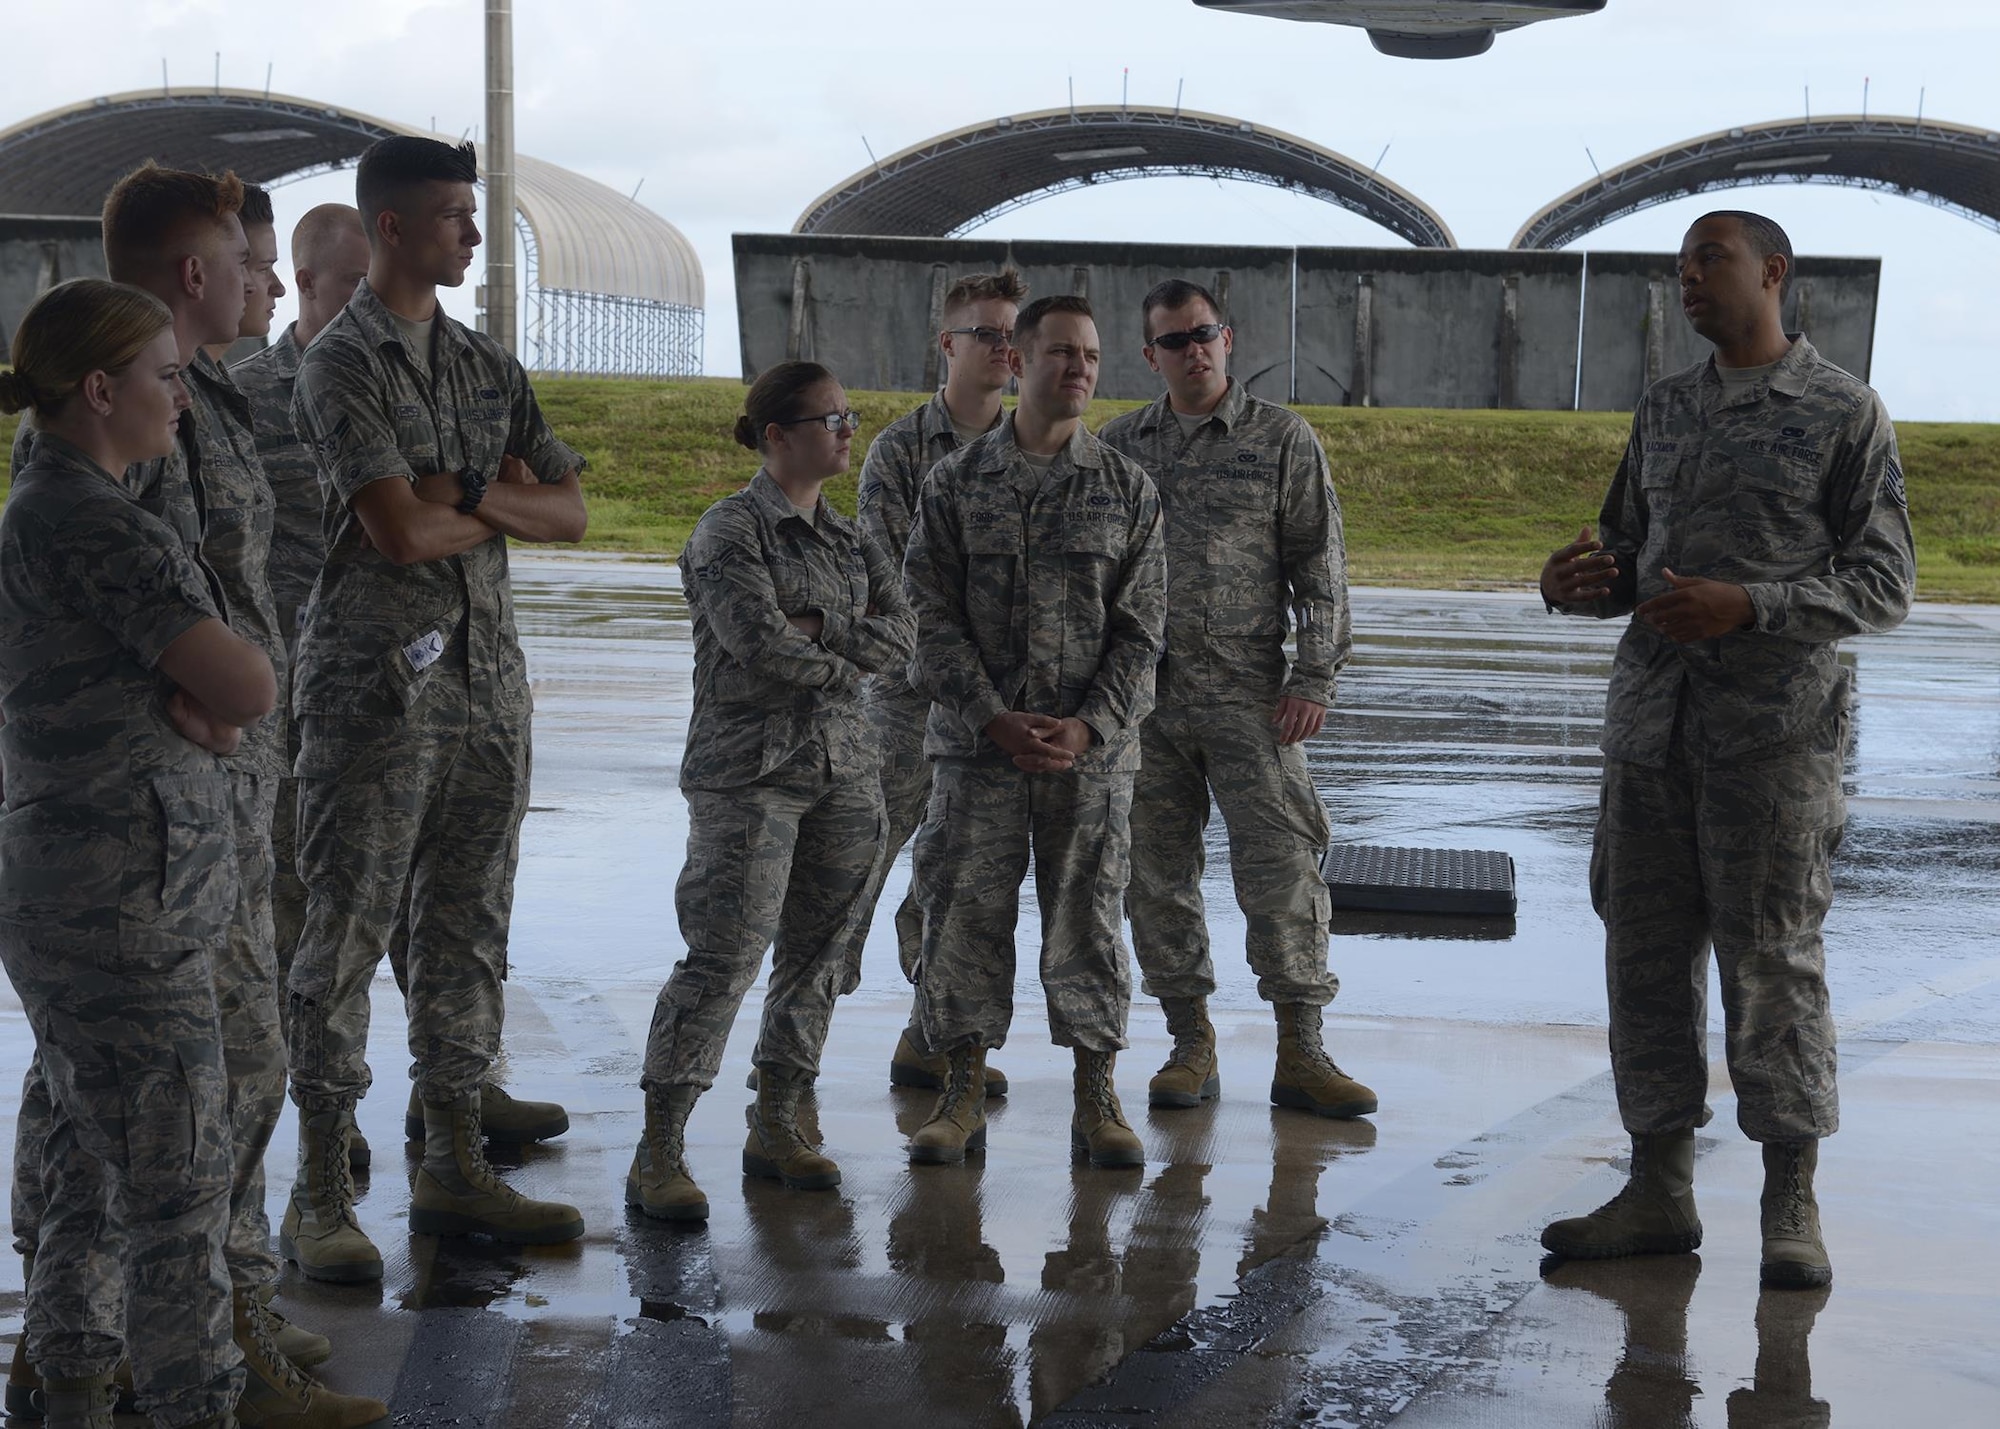 Airmen from the First Term Airmen Center listen to a B-1Lancer crew chief explain the different parts of the aircraft during the Pacific Airpower Tour May 15, 2017, at Andersen Air Force Base, Guam. The tour is held to introduce new Airmen to the various career fields that play a role in supporting the mission. (U.S. Air Force photo by Senior Airman Cierra Presentado/Released)